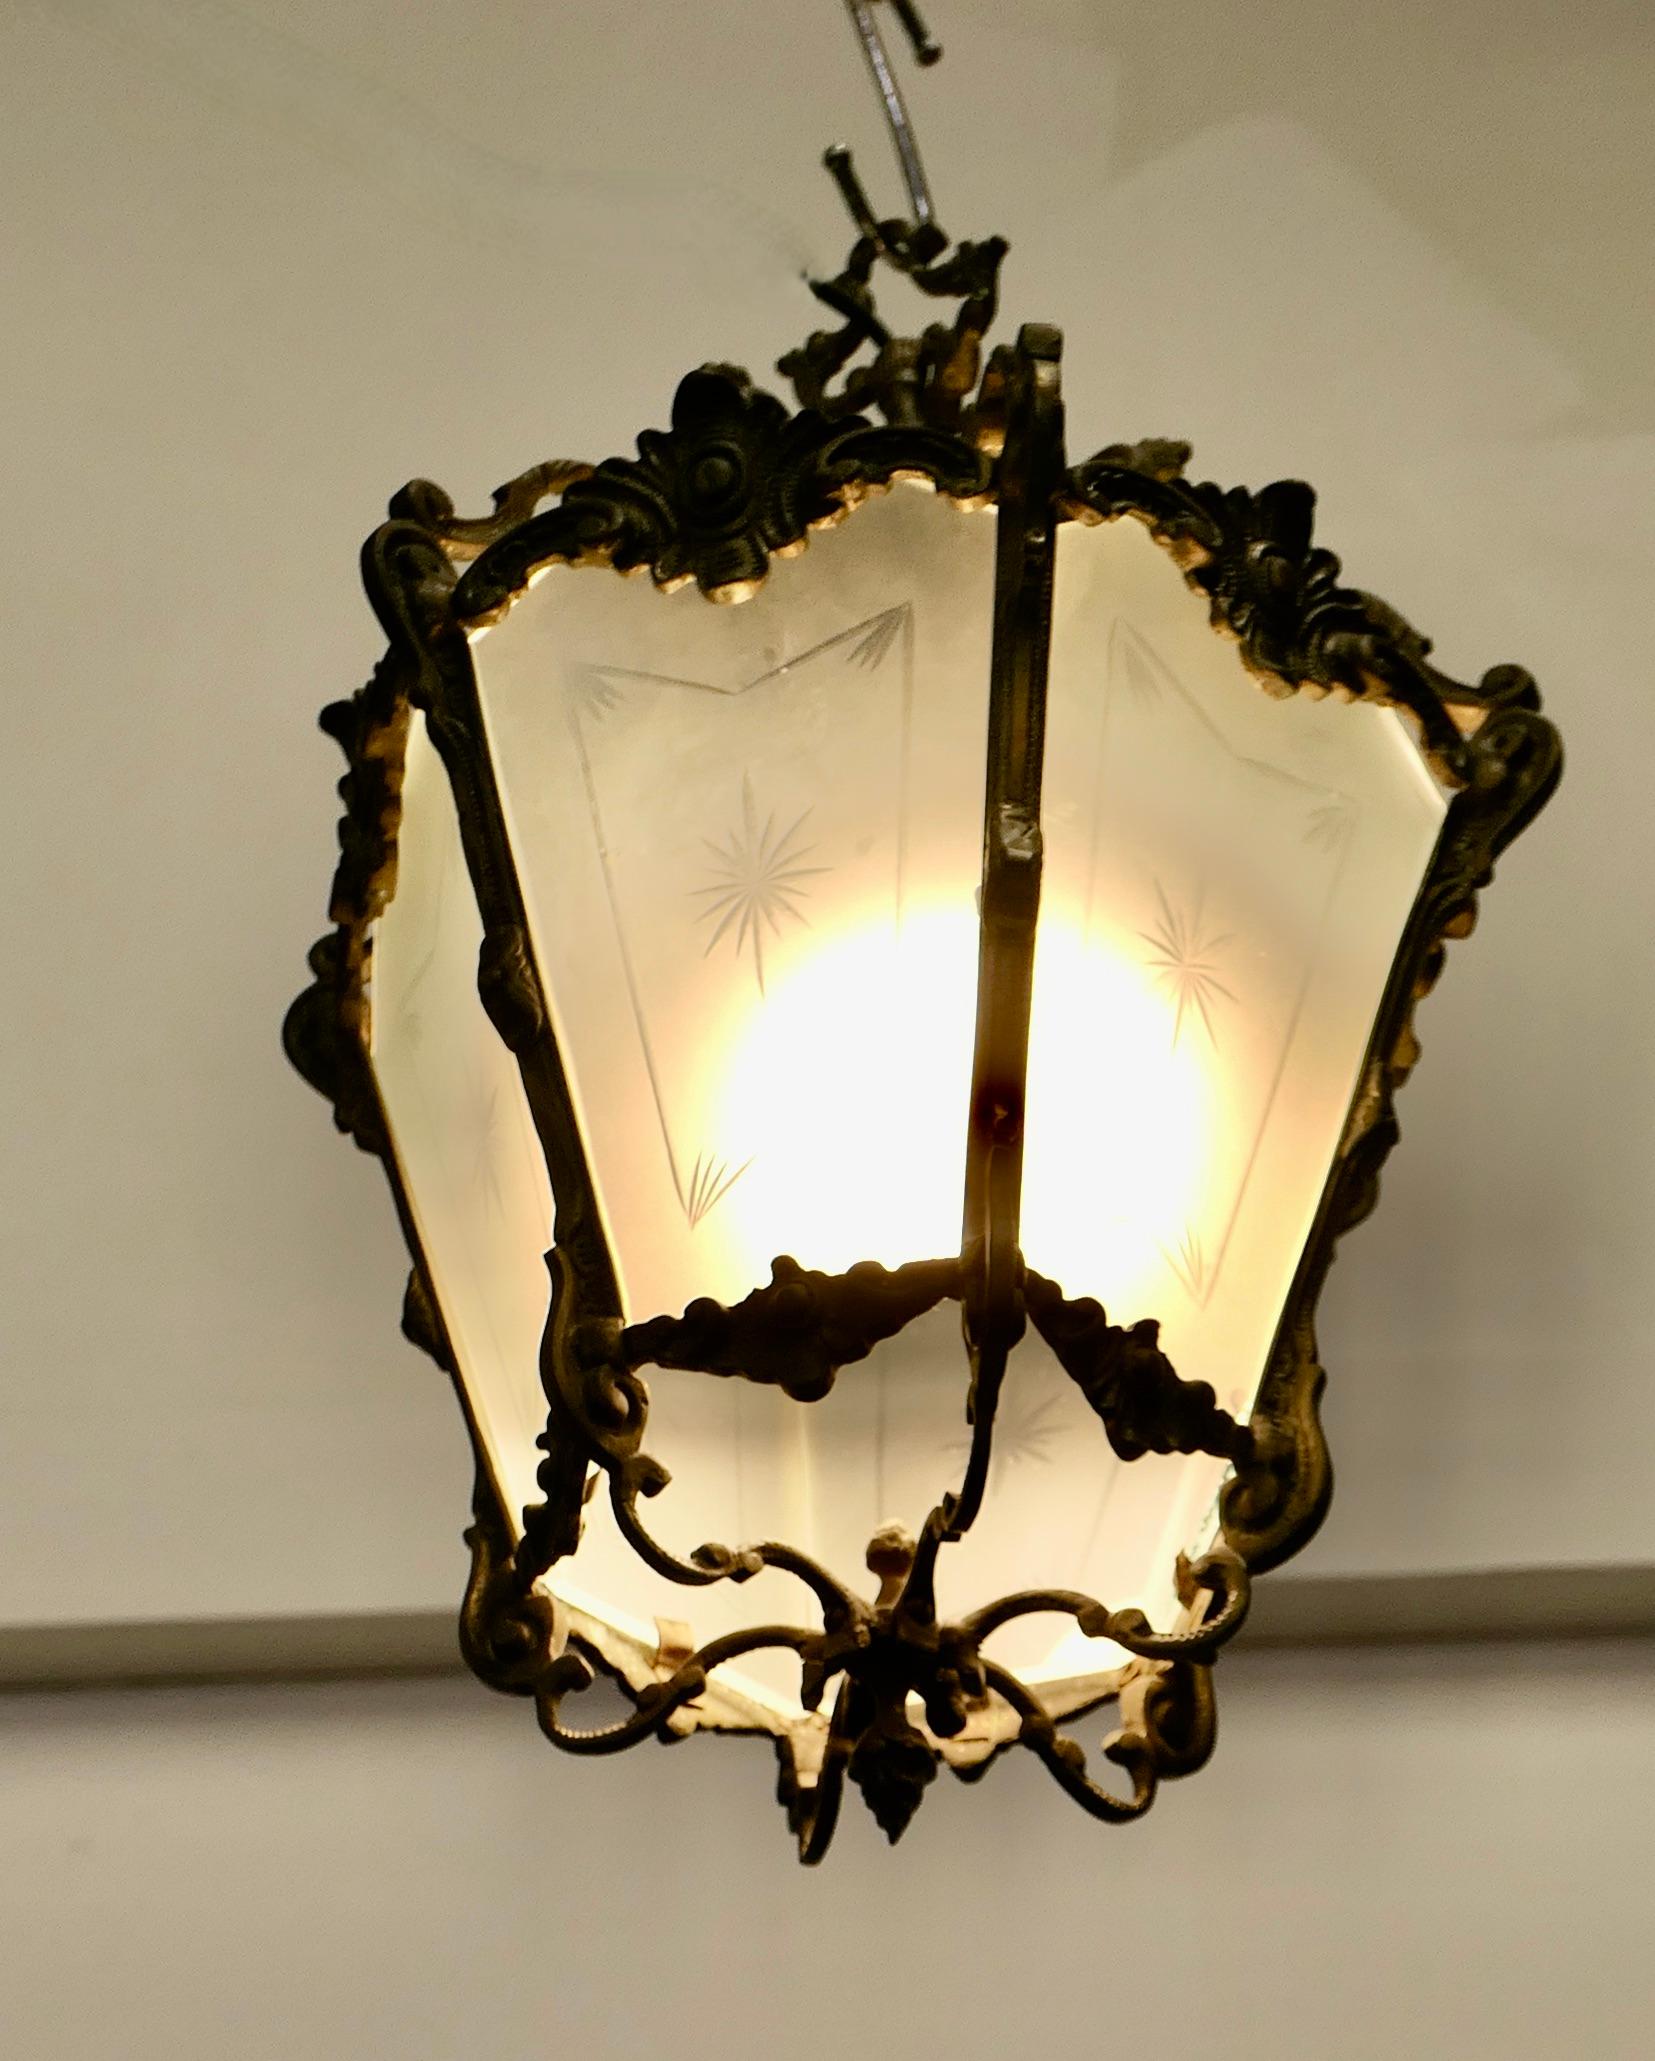  French Rococo Brass & Etched Glass Lantern Hall Light

A superb quality heavy brass lantern, the light is decorated in the French style with leaves, the lantern has 6 sides and the glass panels are decorated with starbursts
The lamp is in good